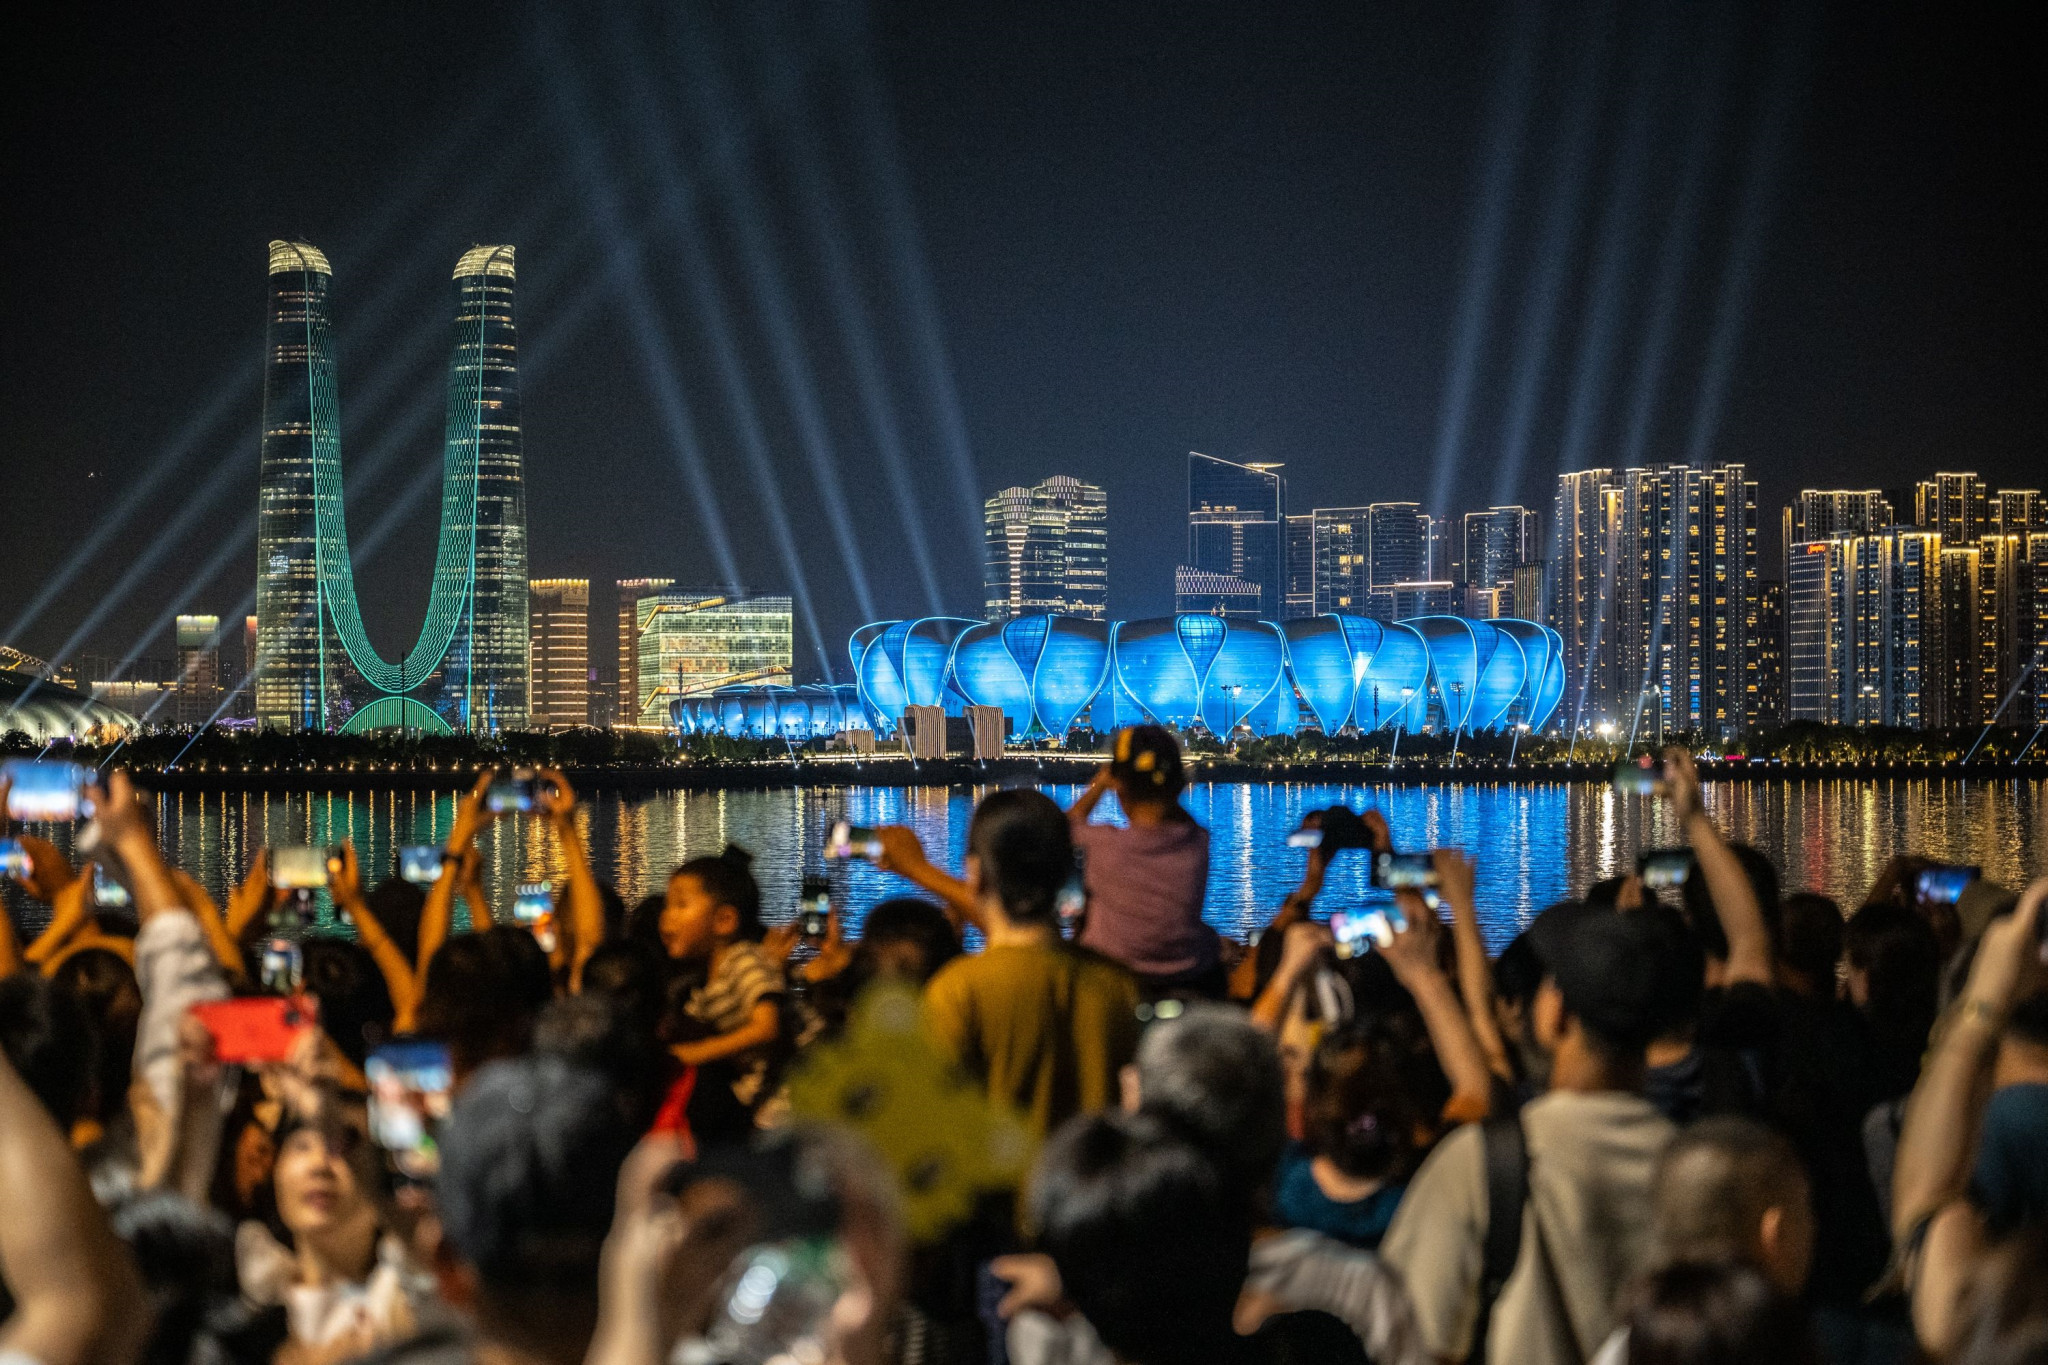 Fireworks to be missing from Hangzhou 2022 Opening Ceremony and replaced with digital light show 